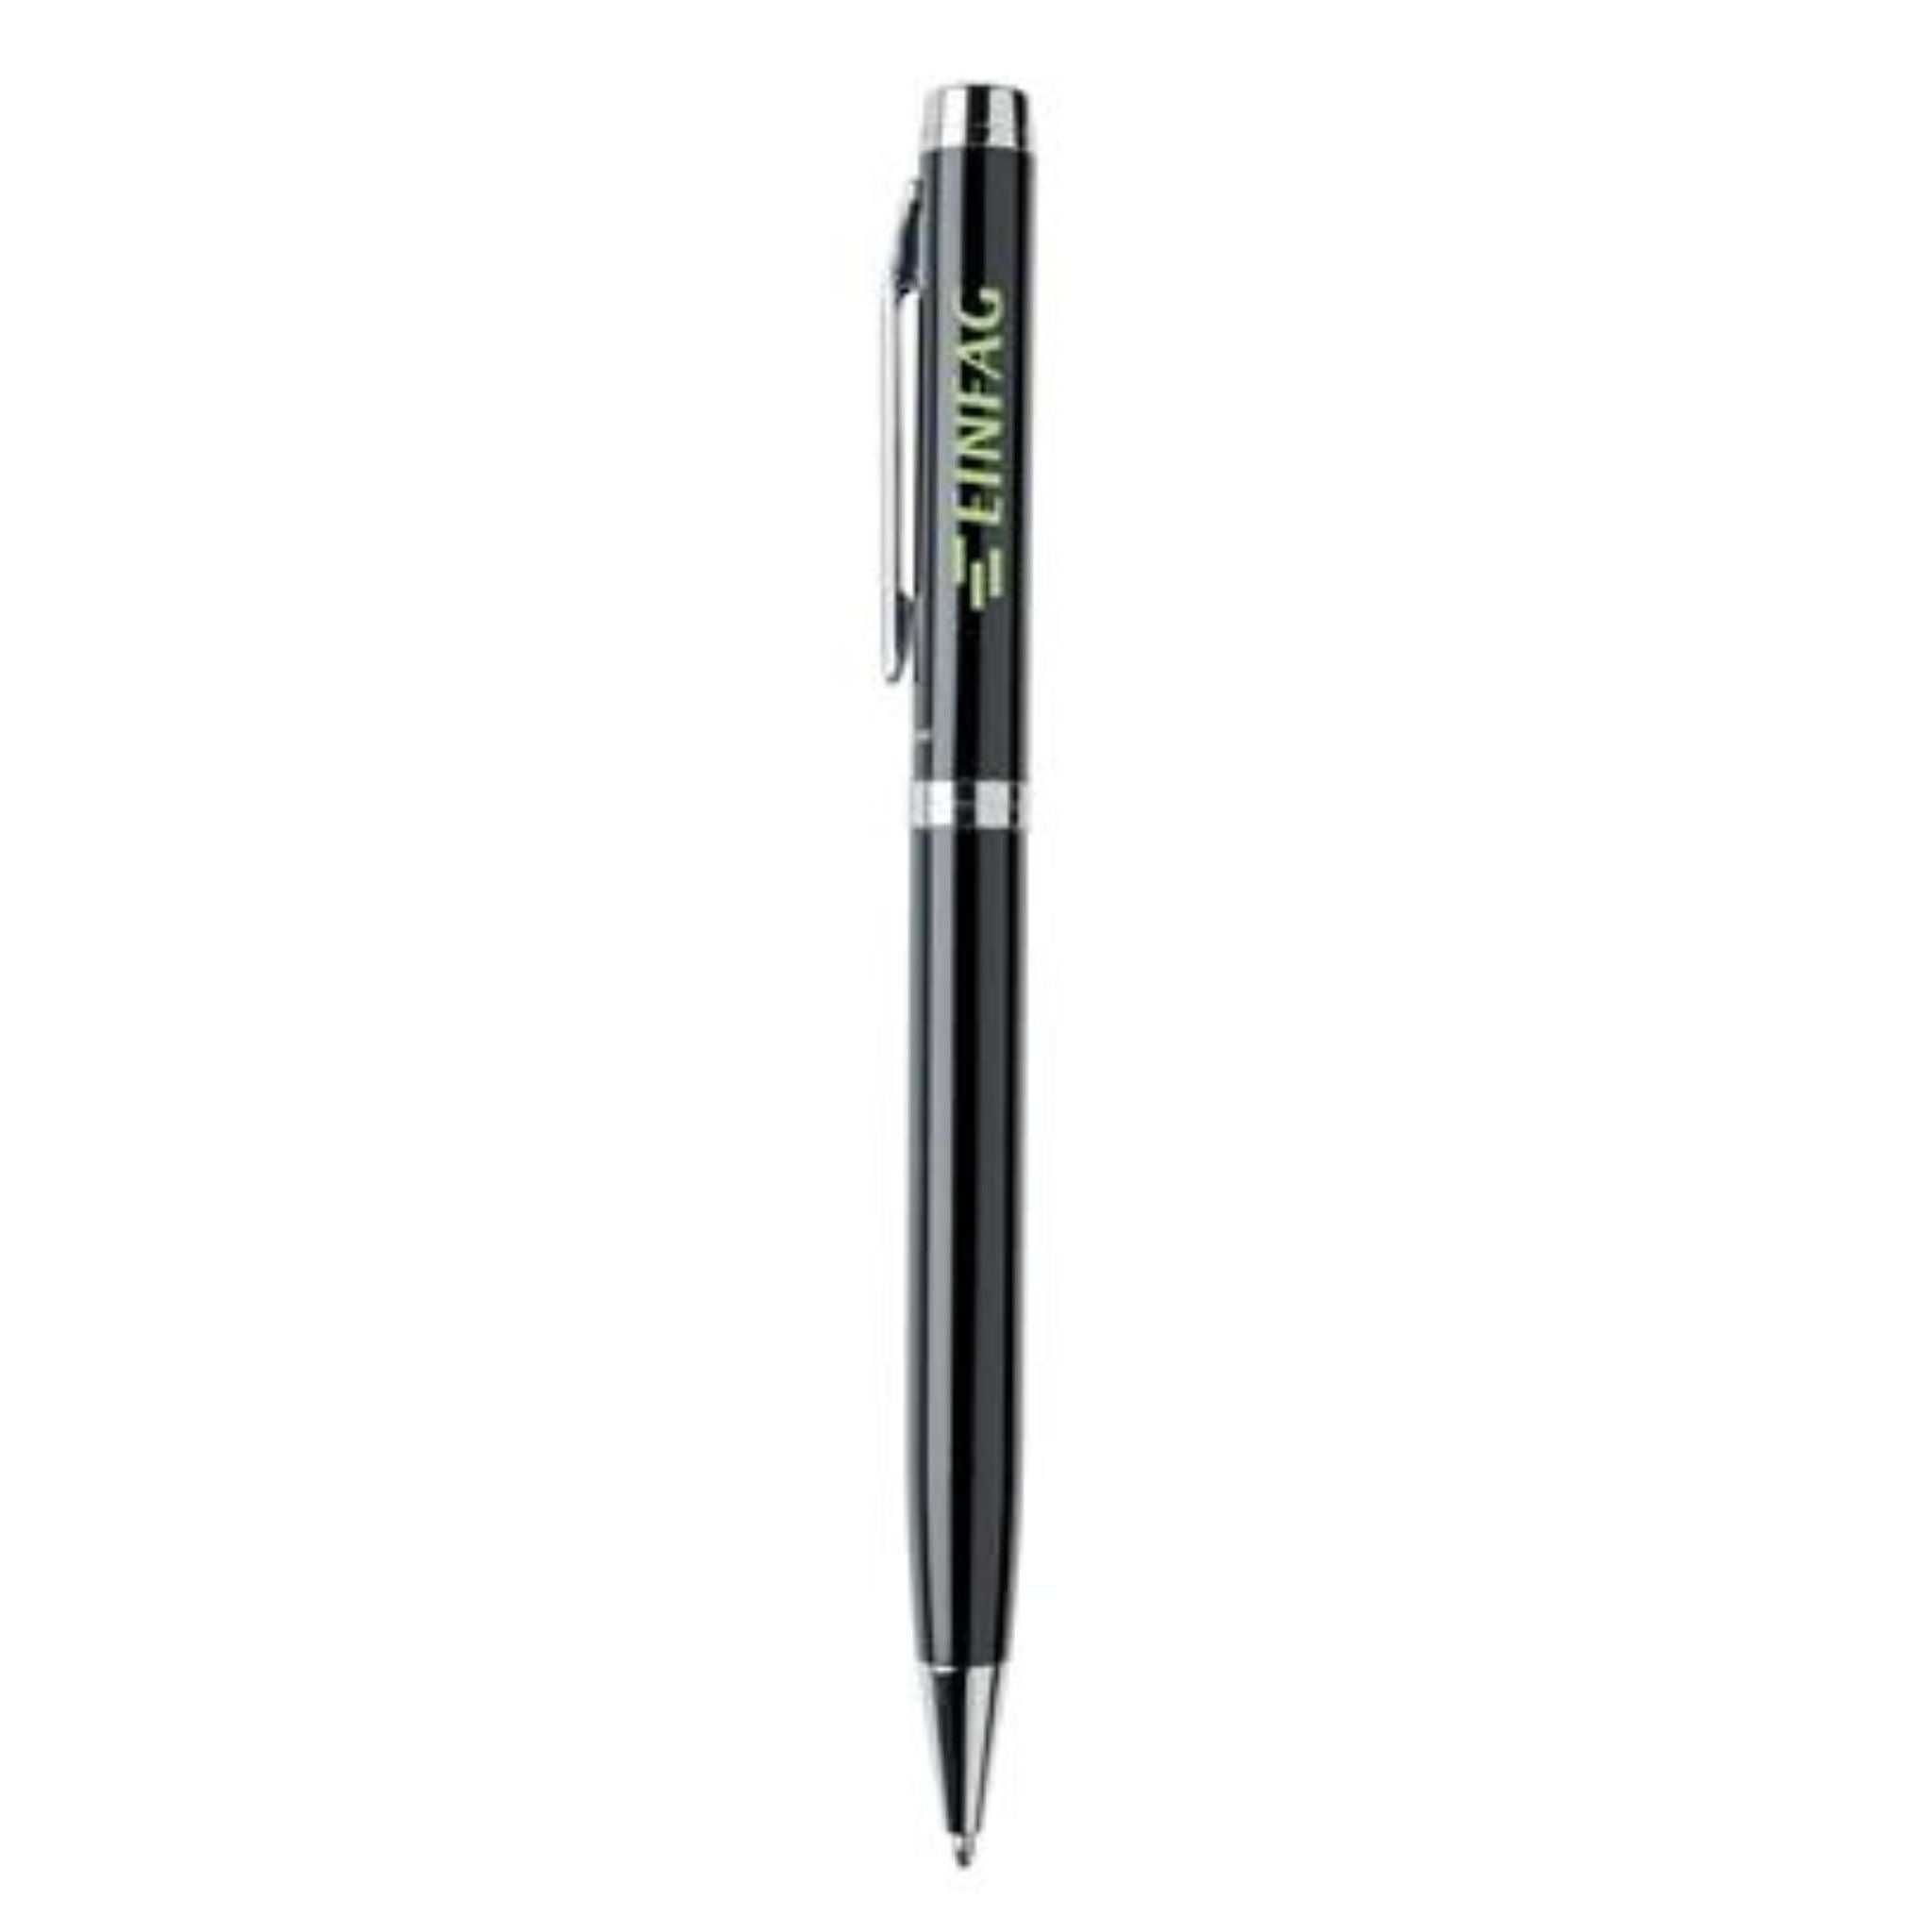 Branded example of Black and silver pen